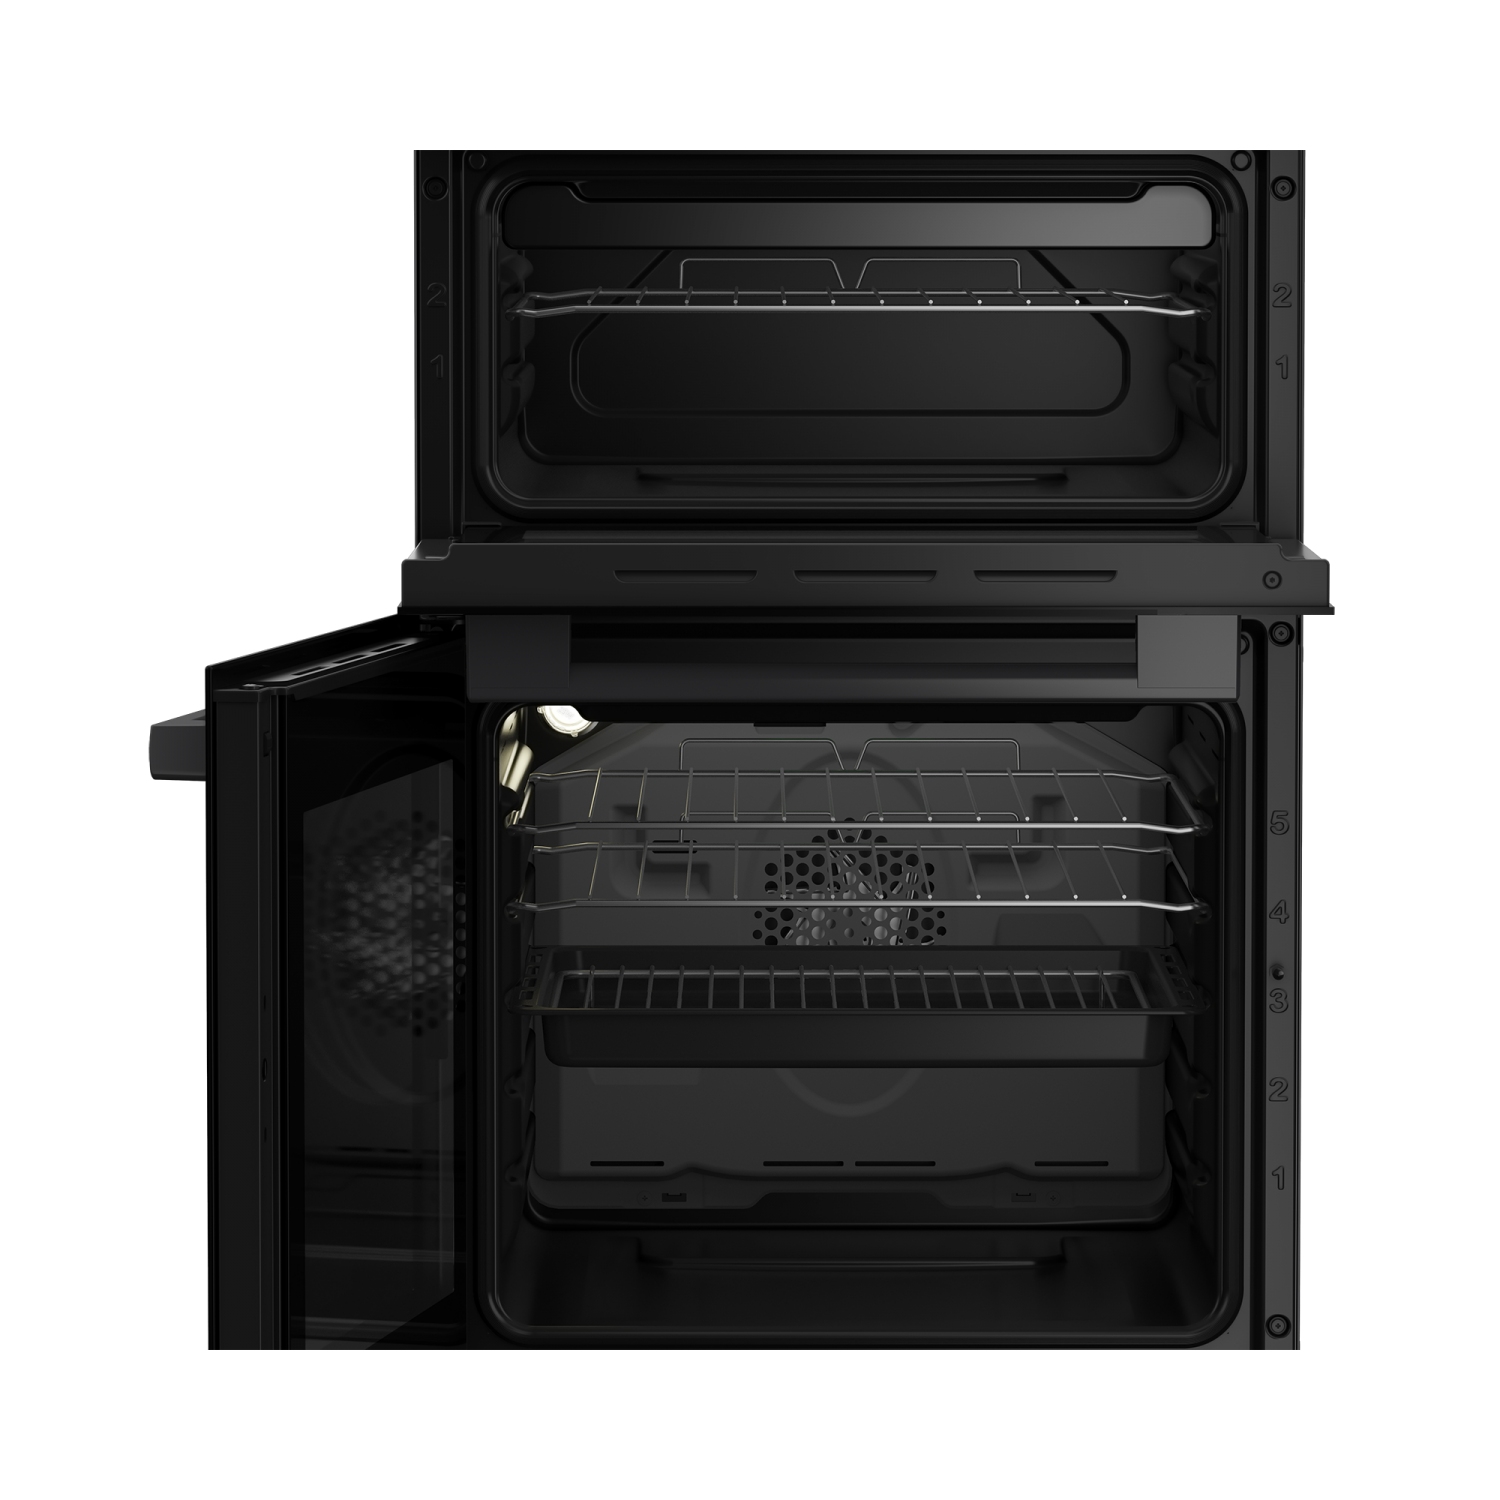 Blomberg HKS951N 50cm Double Oven Electric Cooker with Ceramic Hob - Anthracite - 1